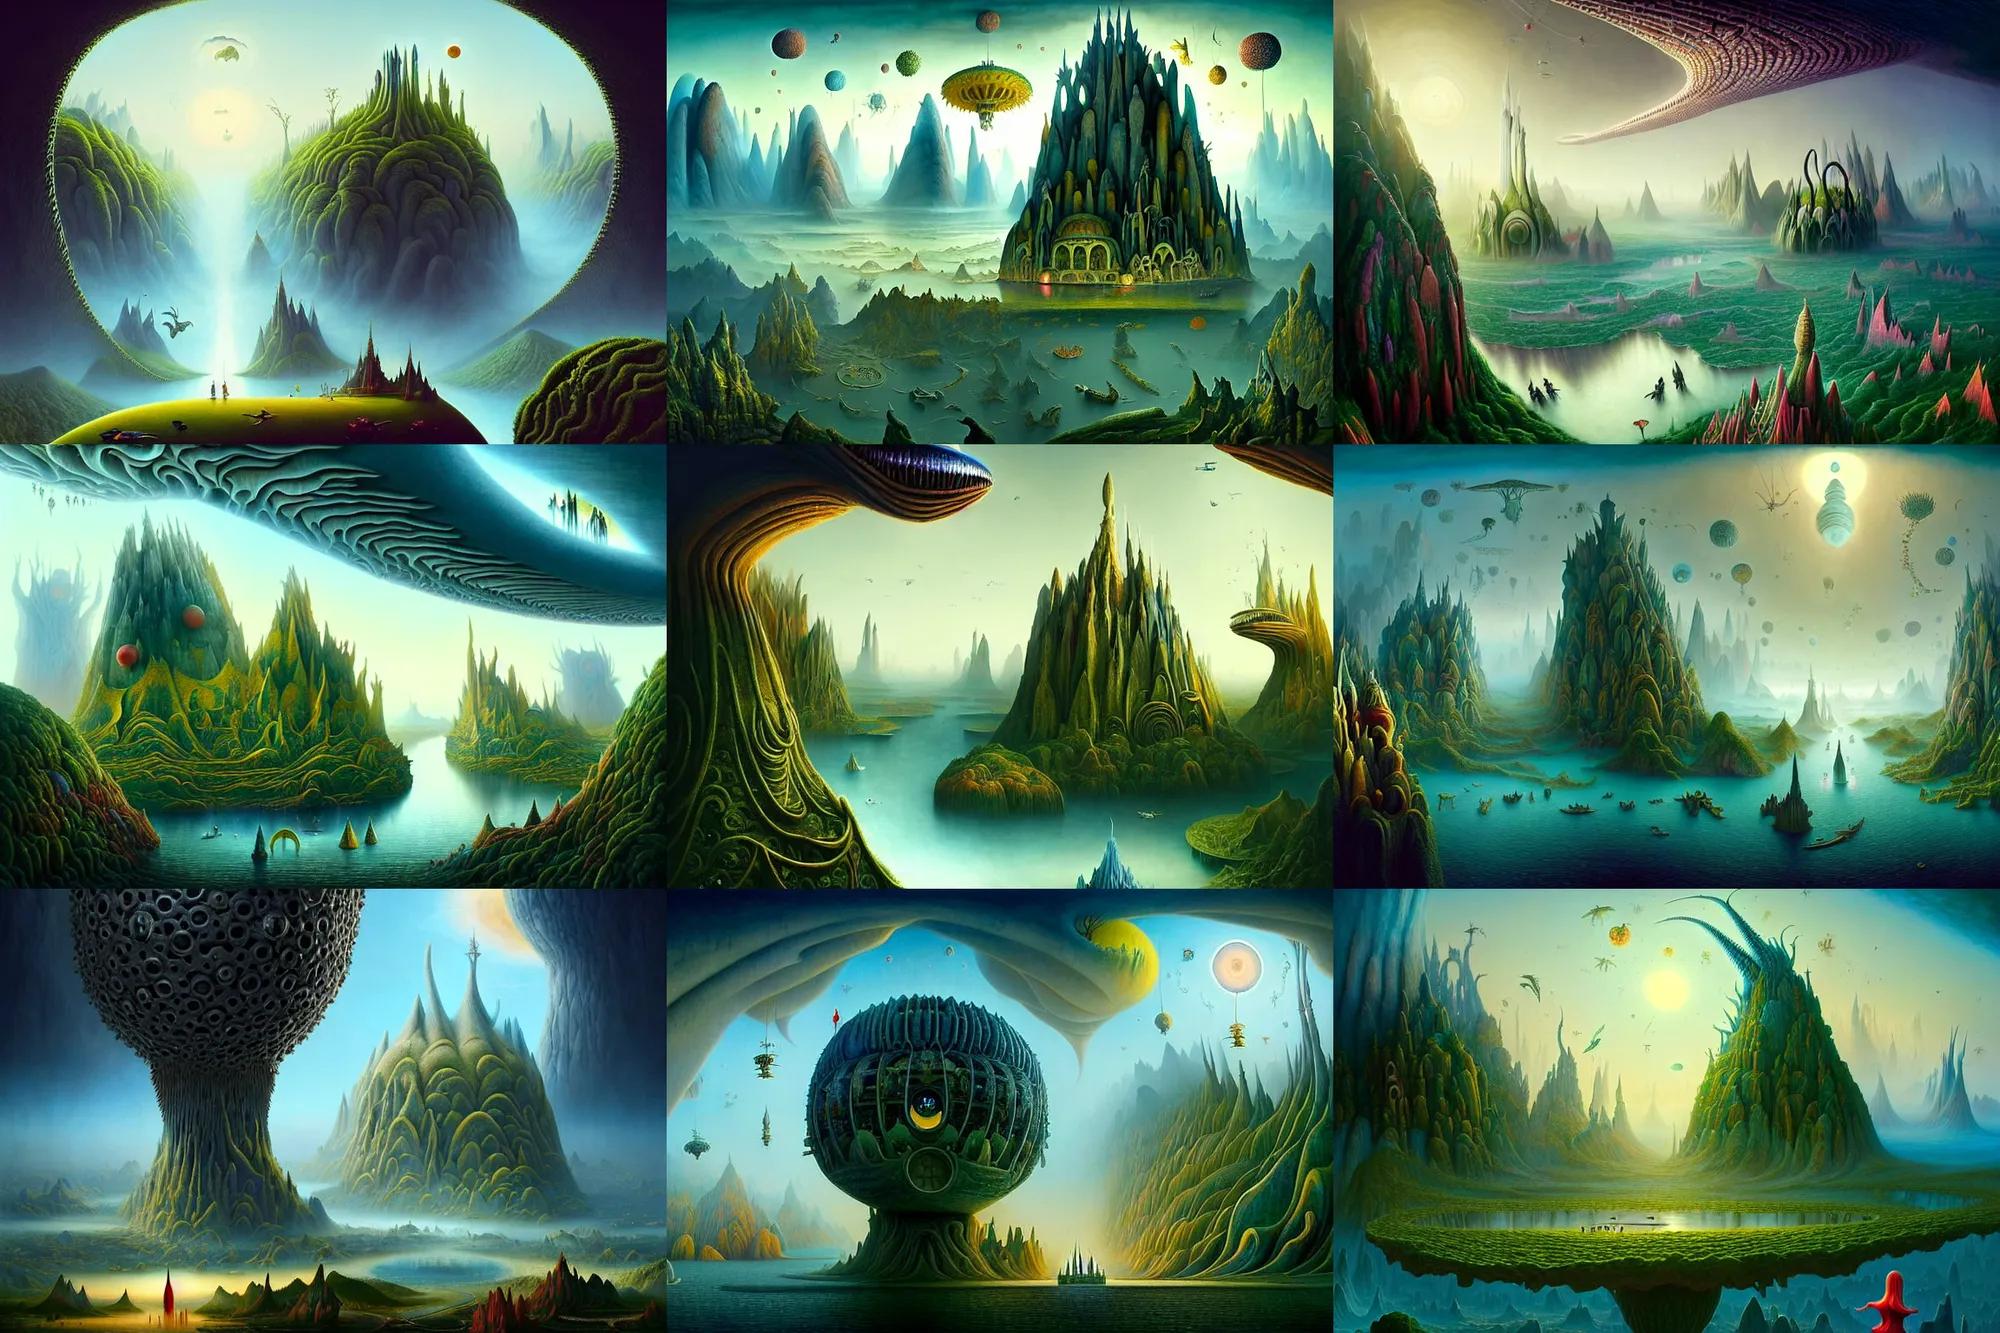 Prompt: a beguiling epic stunning beautiful and insanely detailed matte painting of alien dream worlds with surreal architecture designed by Heironymous Bosch, mega structures inspired by Heironymous Bosch's Garden of Earthly Delights, vast surreal landscape and horizon by Asher Durand and Cyril Rolando and Andrew Ferez and James Gurney, masterpiece!!!, grand!, imaginative!!!, whimsical!!, epic scale, intricate details, sense of awe, elite, wonder, insanely complex, masterful composition!!!, sharp focus, fantasy realism, dramatic lighting